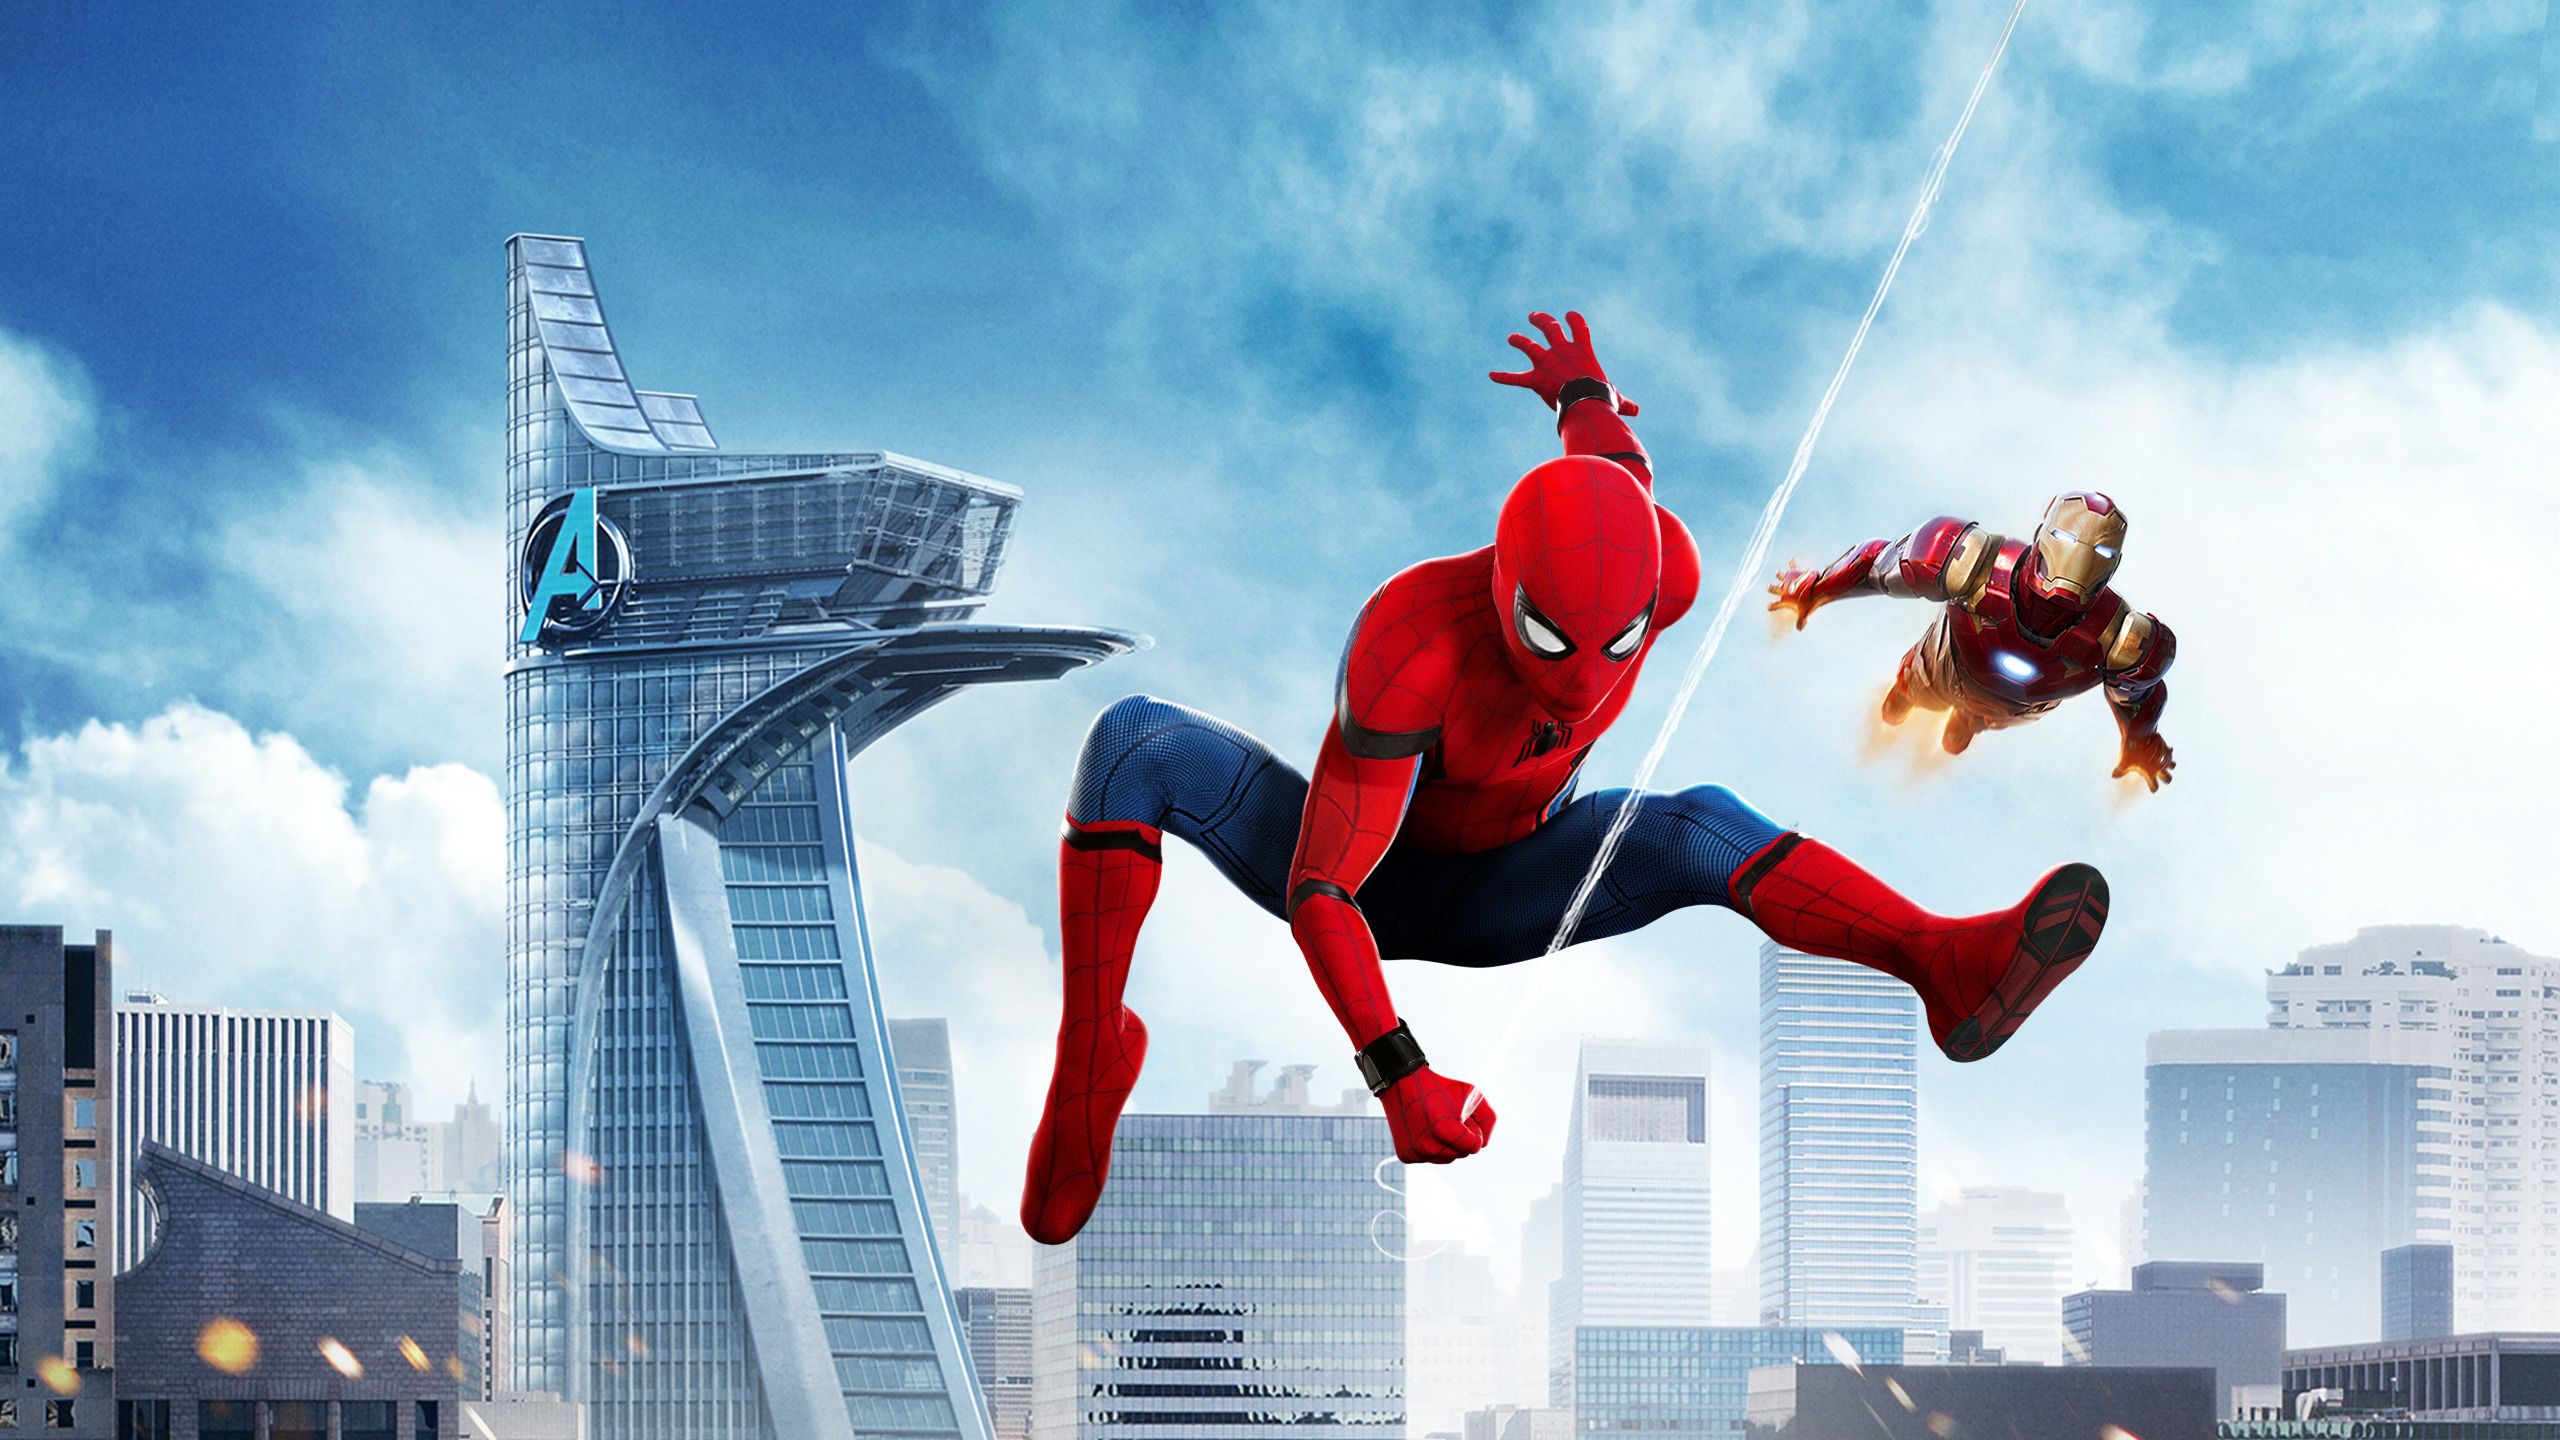 Purchase Spider-Man: Homecoming on digital and stream instantly or download...